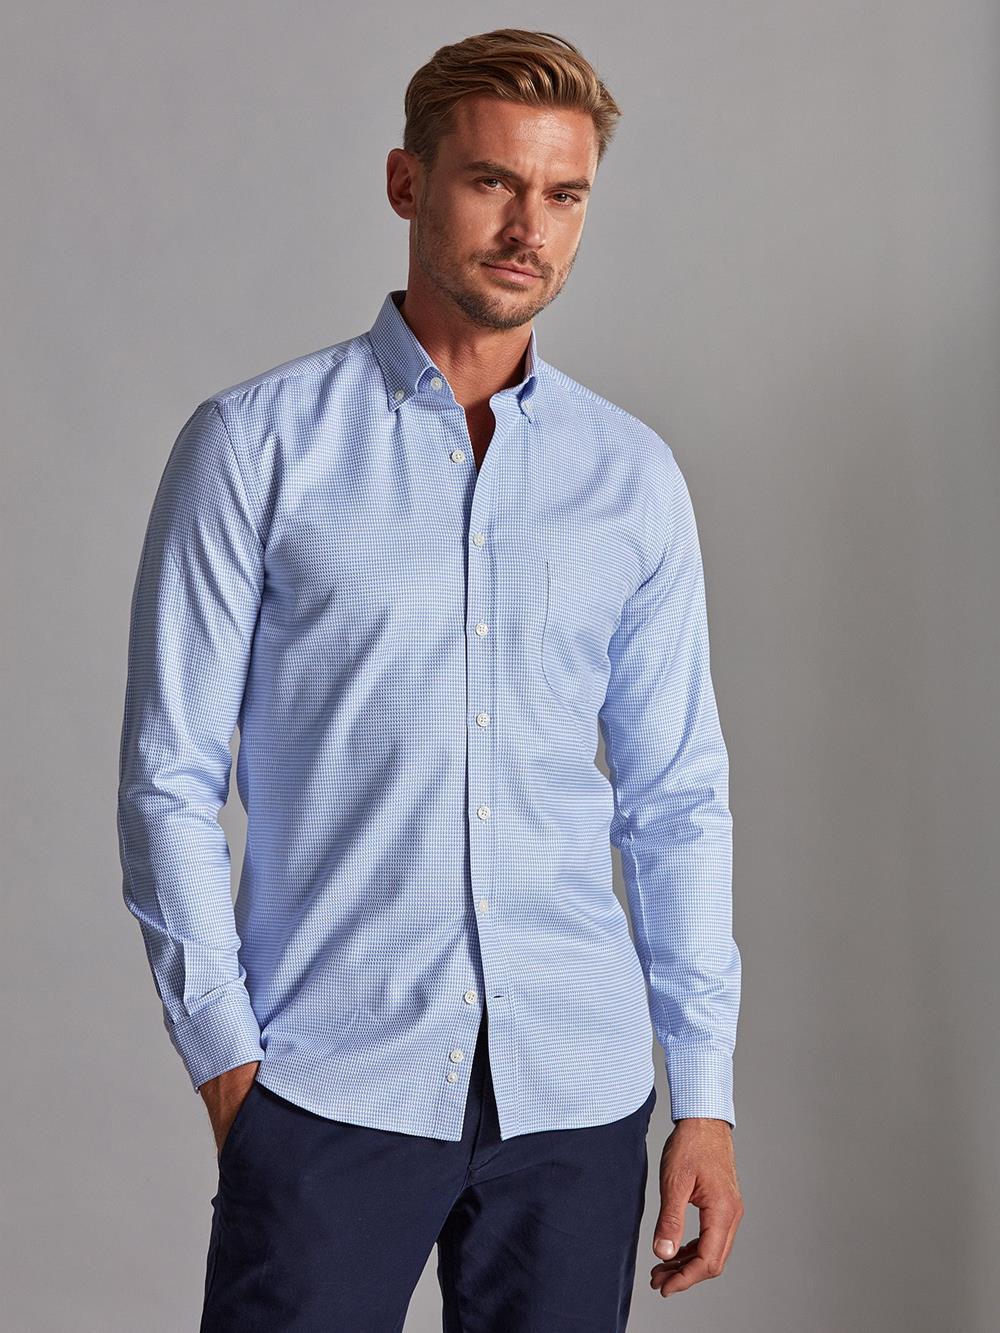 Willy sky blue twill shirt - Button-down collar